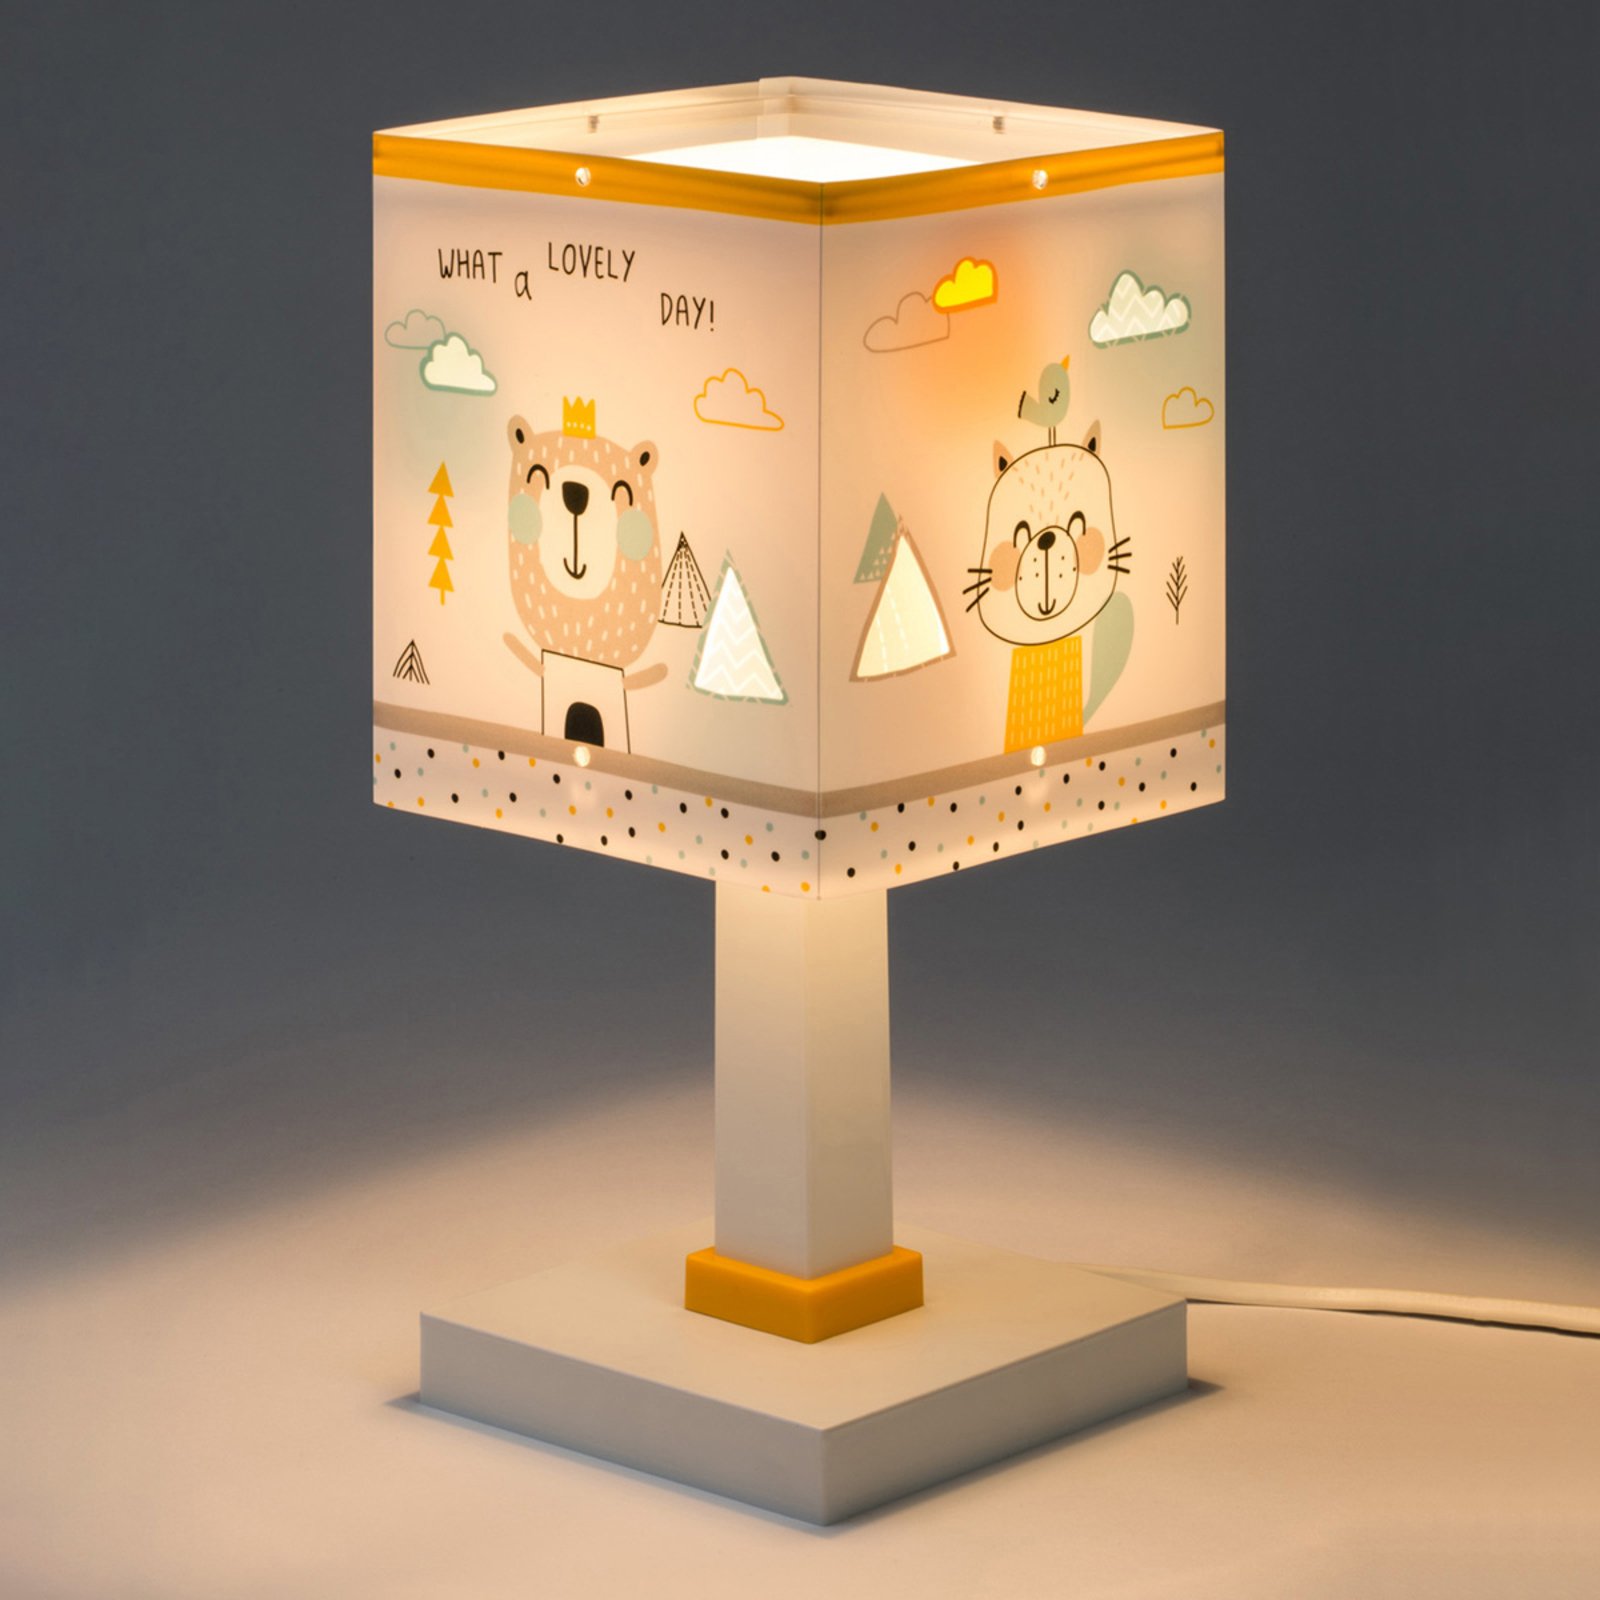 Dalber Hello Little table lamp for a child’s room